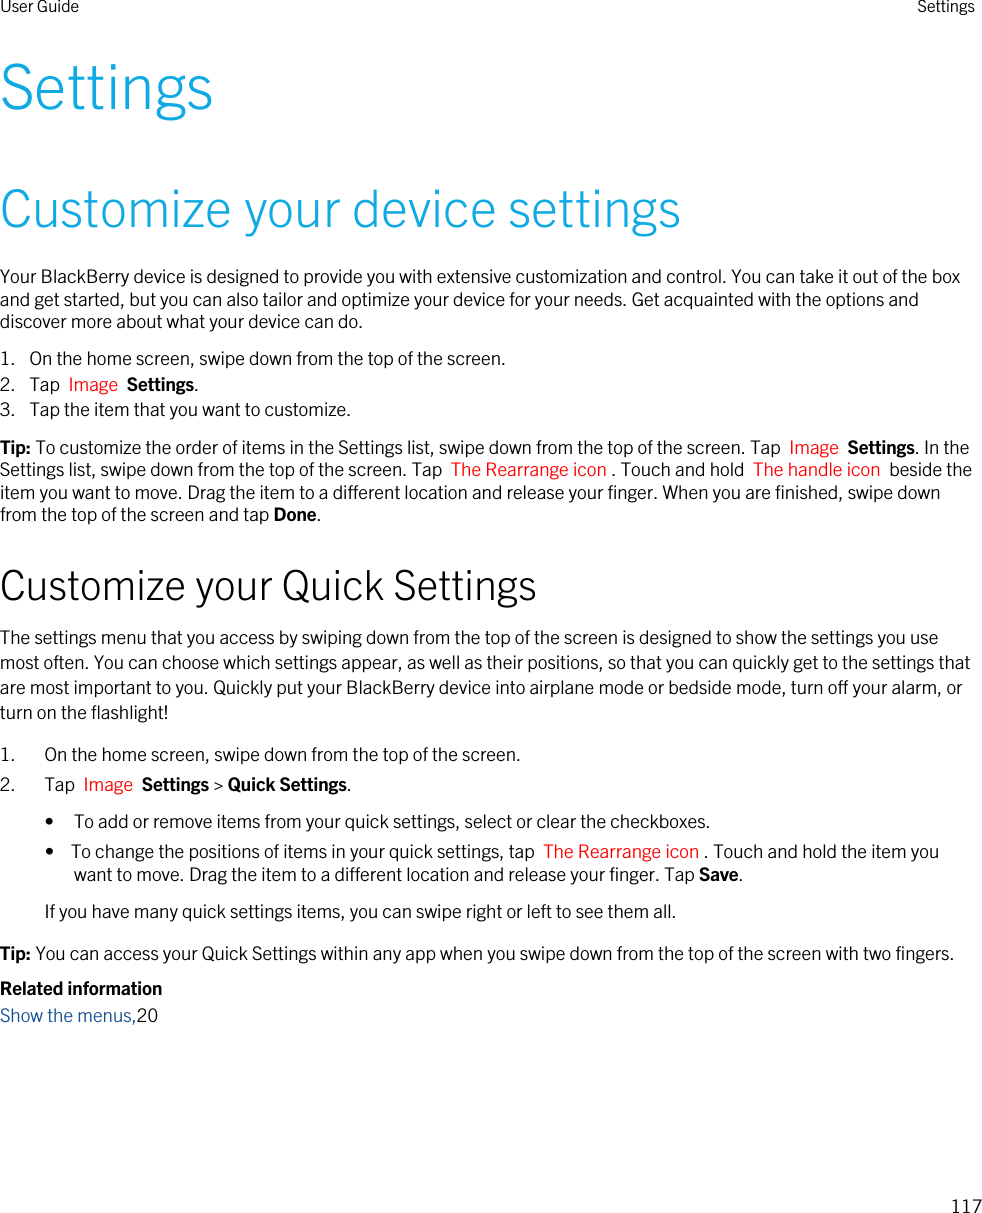 SettingsCustomize your device settingsYour BlackBerry device is designed to provide you with extensive customization and control. You can take it out of the box and get started, but you can also tailor and optimize your device for your needs. Get acquainted with the options and discover more about what your device can do.1. On the home screen, swipe down from the top of the screen.2. Tap  Image  Settings.3. Tap the item that you want to customize.Tip: To customize the order of items in the Settings list, swipe down from the top of the screen. Tap  Image  Settings. In the Settings list, swipe down from the top of the screen. Tap  The Rearrange icon . Touch and hold  The handle icon  beside the item you want to move. Drag the item to a different location and release your finger. When you are finished, swipe down from the top of the screen and tap Done.Customize your Quick SettingsThe settings menu that you access by swiping down from the top of the screen is designed to show the settings you use most often. You can choose which settings appear, as well as their positions, so that you can quickly get to the settings that are most important to you. Quickly put your BlackBerry device into airplane mode or bedside mode, turn off your alarm, or turn on the flashlight!1. On the home screen, swipe down from the top of the screen.2. Tap  Image  Settings &gt; Quick Settings.• To add or remove items from your quick settings, select or clear the checkboxes.•  To change the positions of items in your quick settings, tap  The Rearrange icon . Touch and hold the item you want to move. Drag the item to a different location and release your finger. Tap Save.If you have many quick settings items, you can swipe right or left to see them all.Tip: You can access your Quick Settings within any app when you swipe down from the top of the screen with two fingers.Related informationShow the menus,20User Guide Settings117